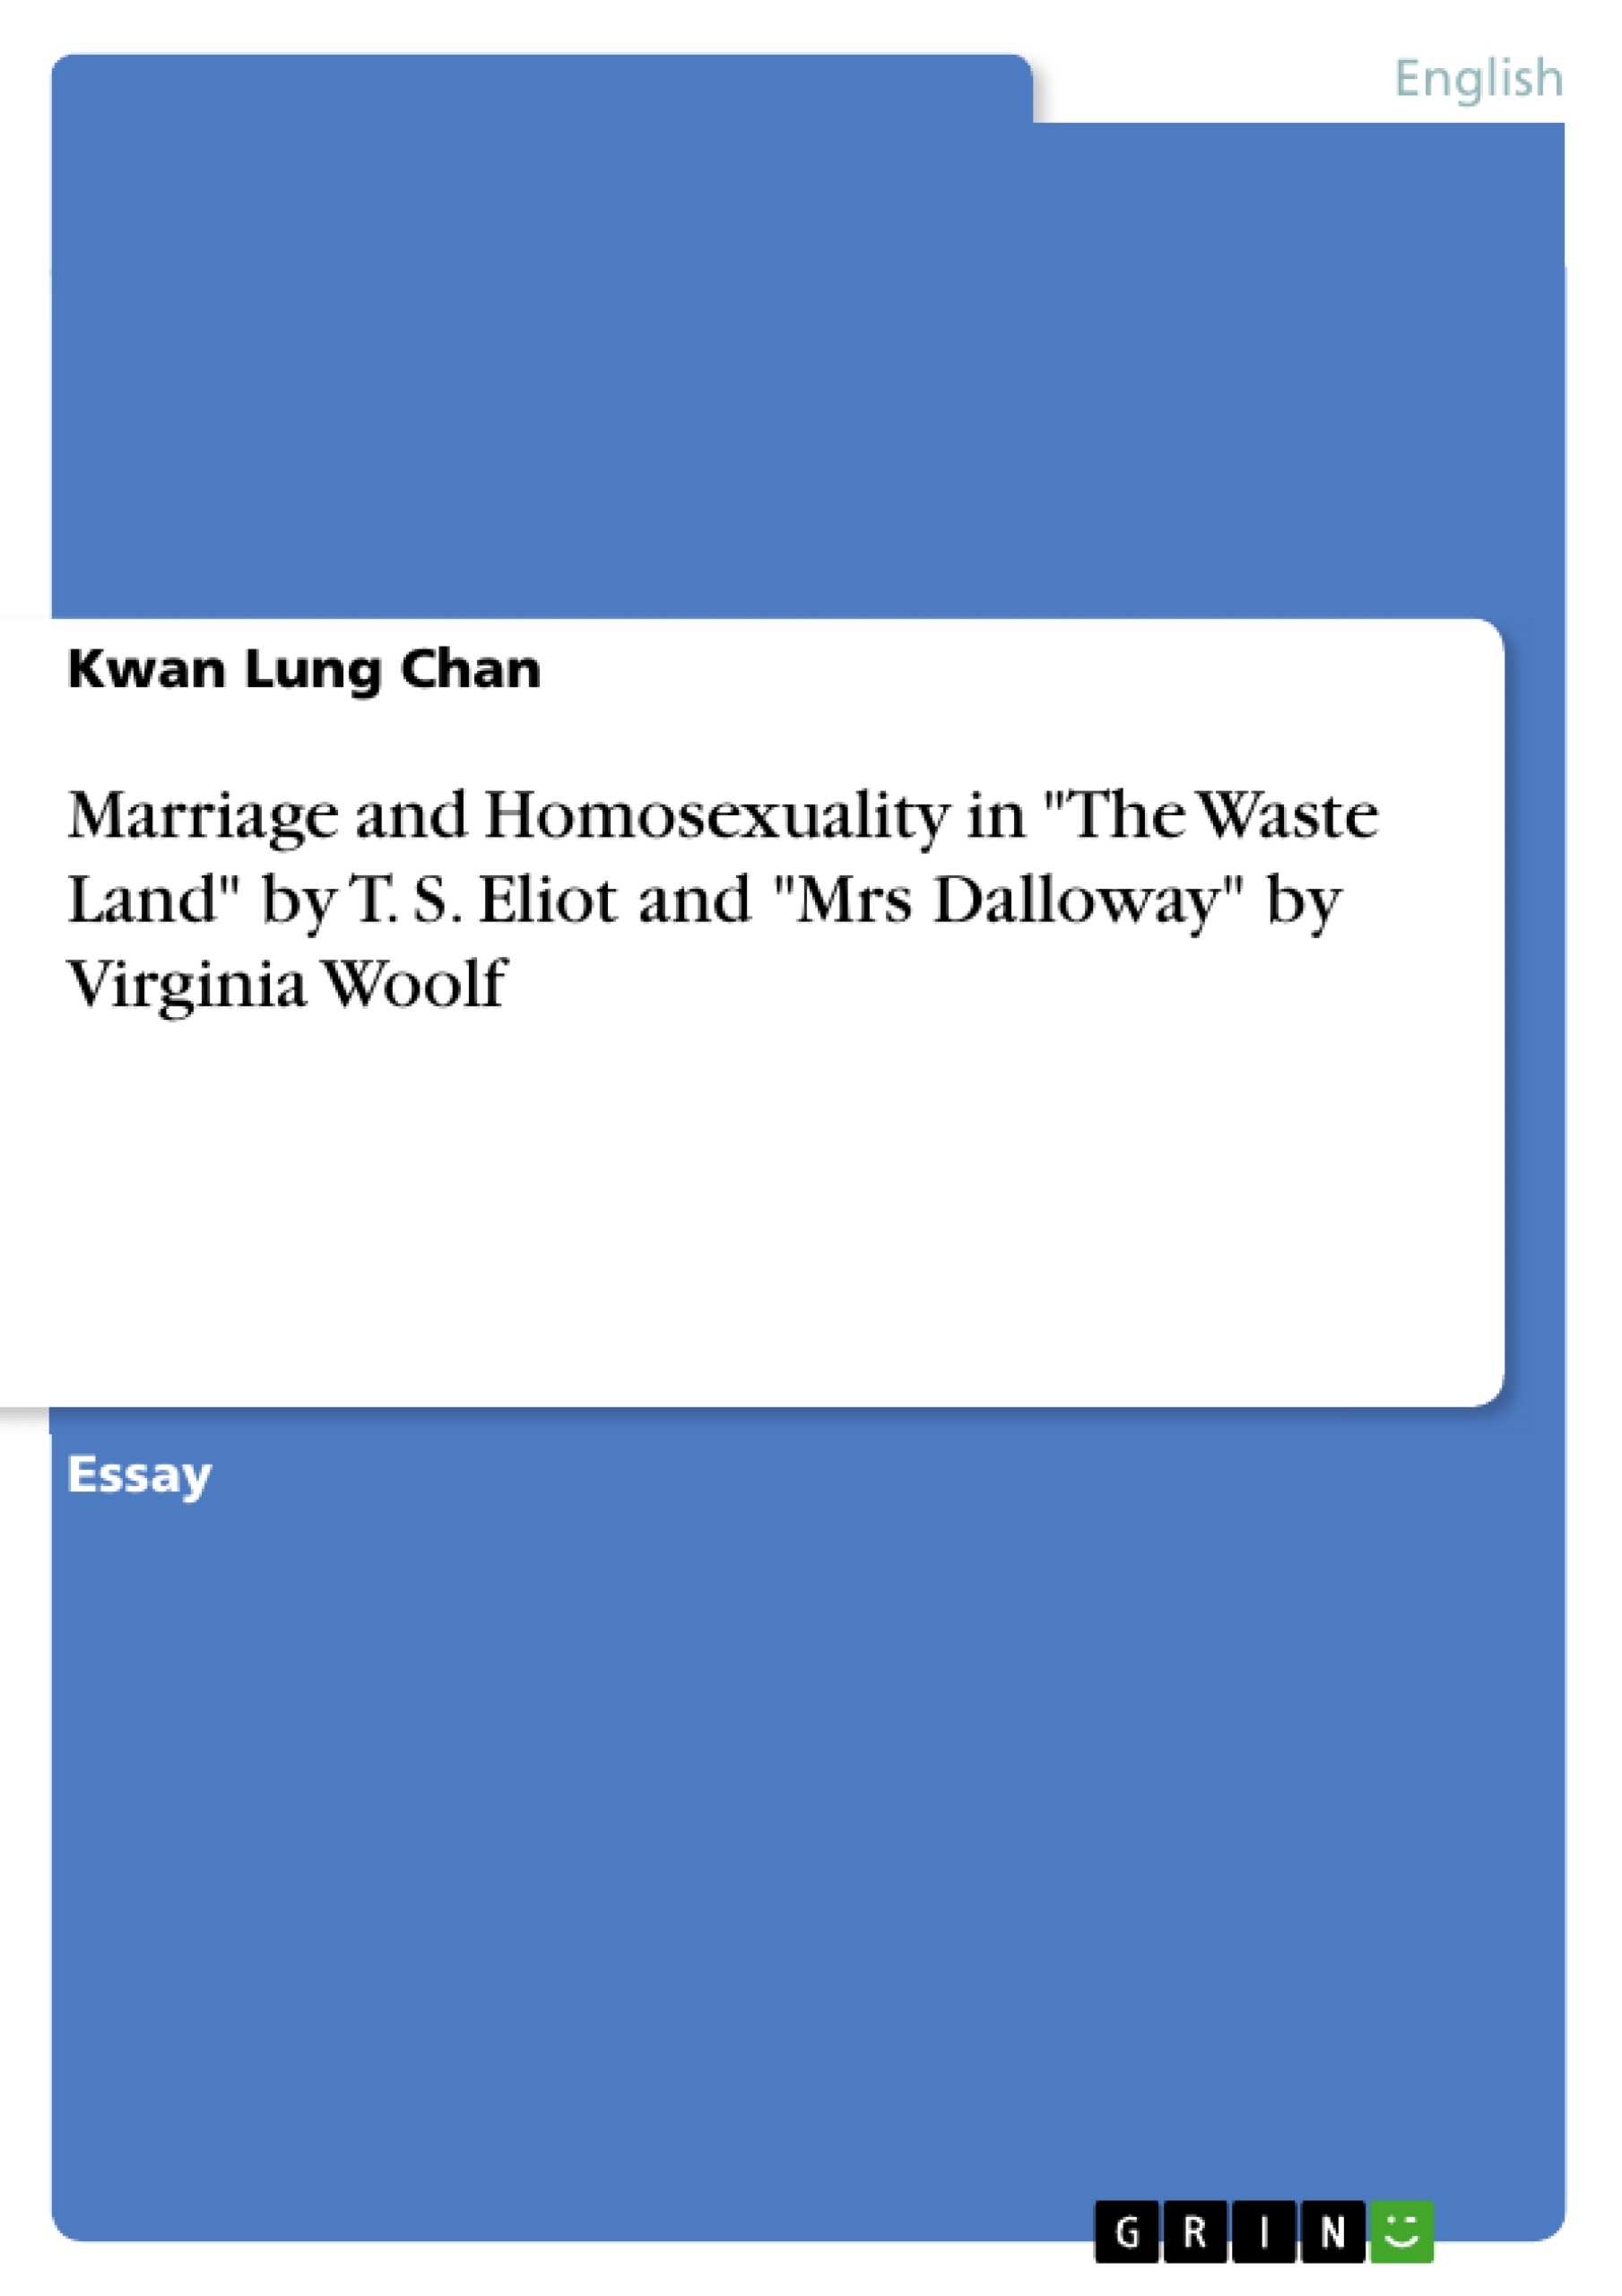 Título: Marriage and Homosexuality in "The Waste Land" by T. S. Eliot and "Mrs Dalloway" by Virginia Woolf